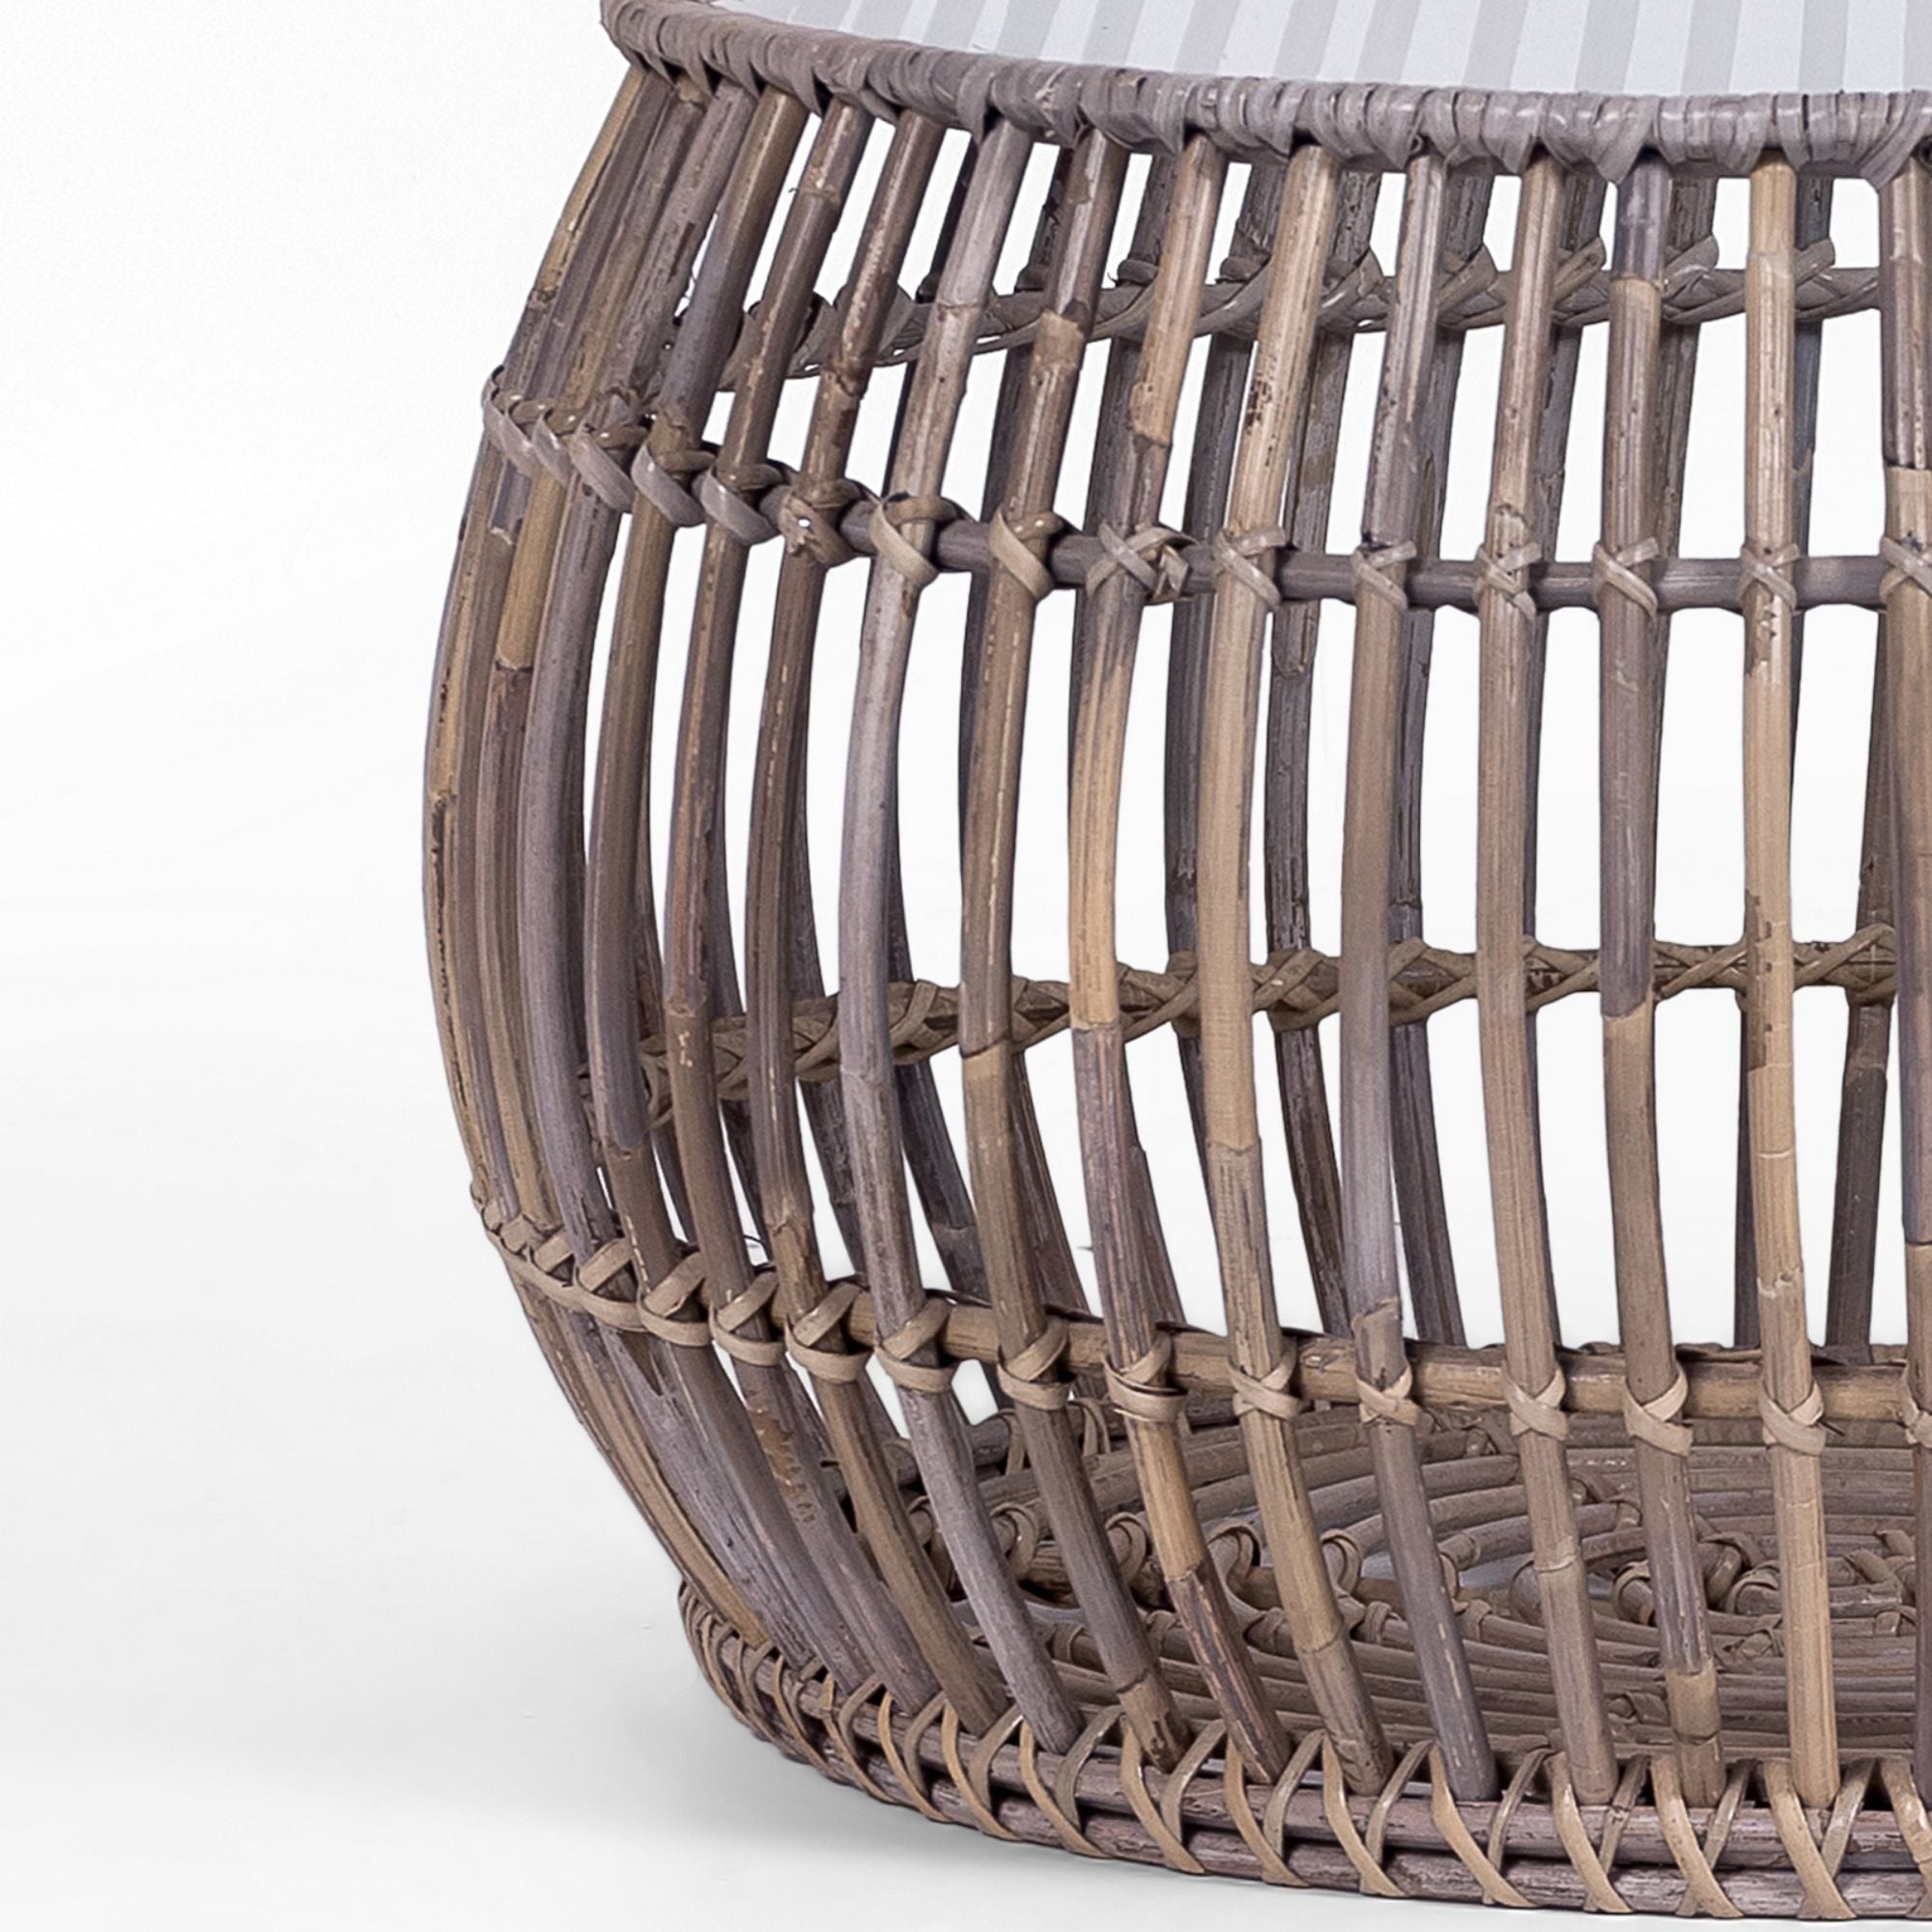 70Cm Glass Topped Rattan Round Coffee Table - Natural